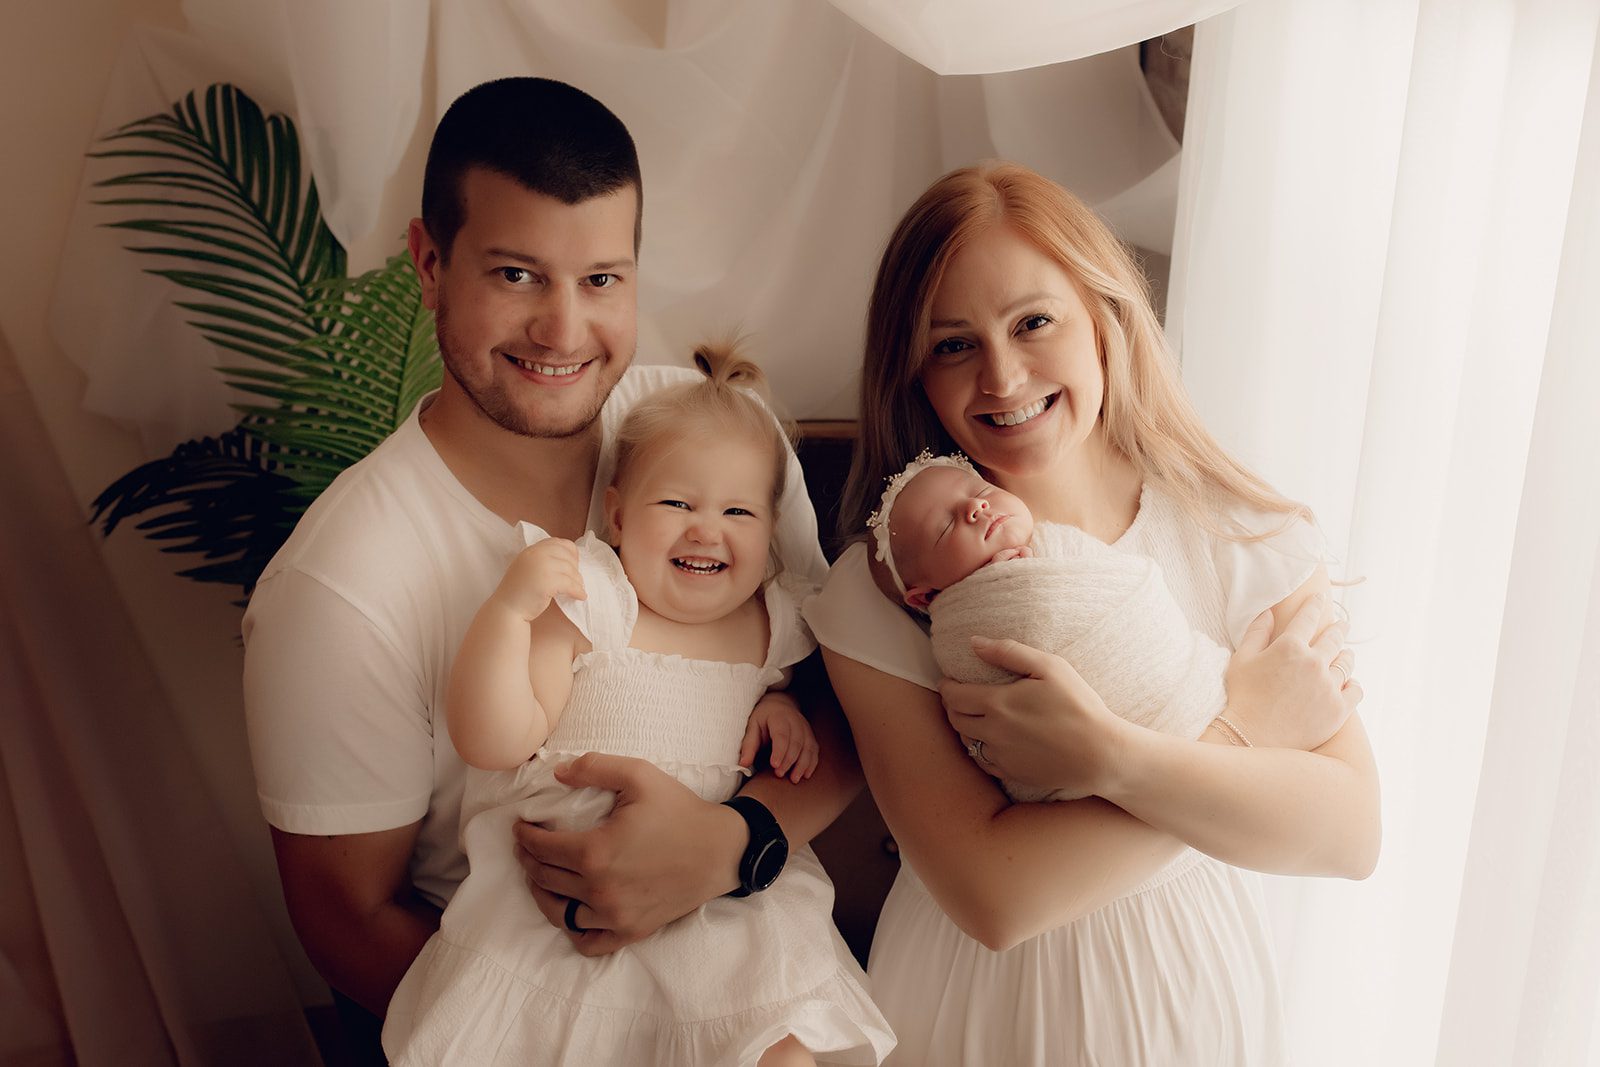 A mom in a white dress holds her sleeping newborn baby while dad holds their young toddler daughter in a white dress next to her after getting help from Beautiful birth choices